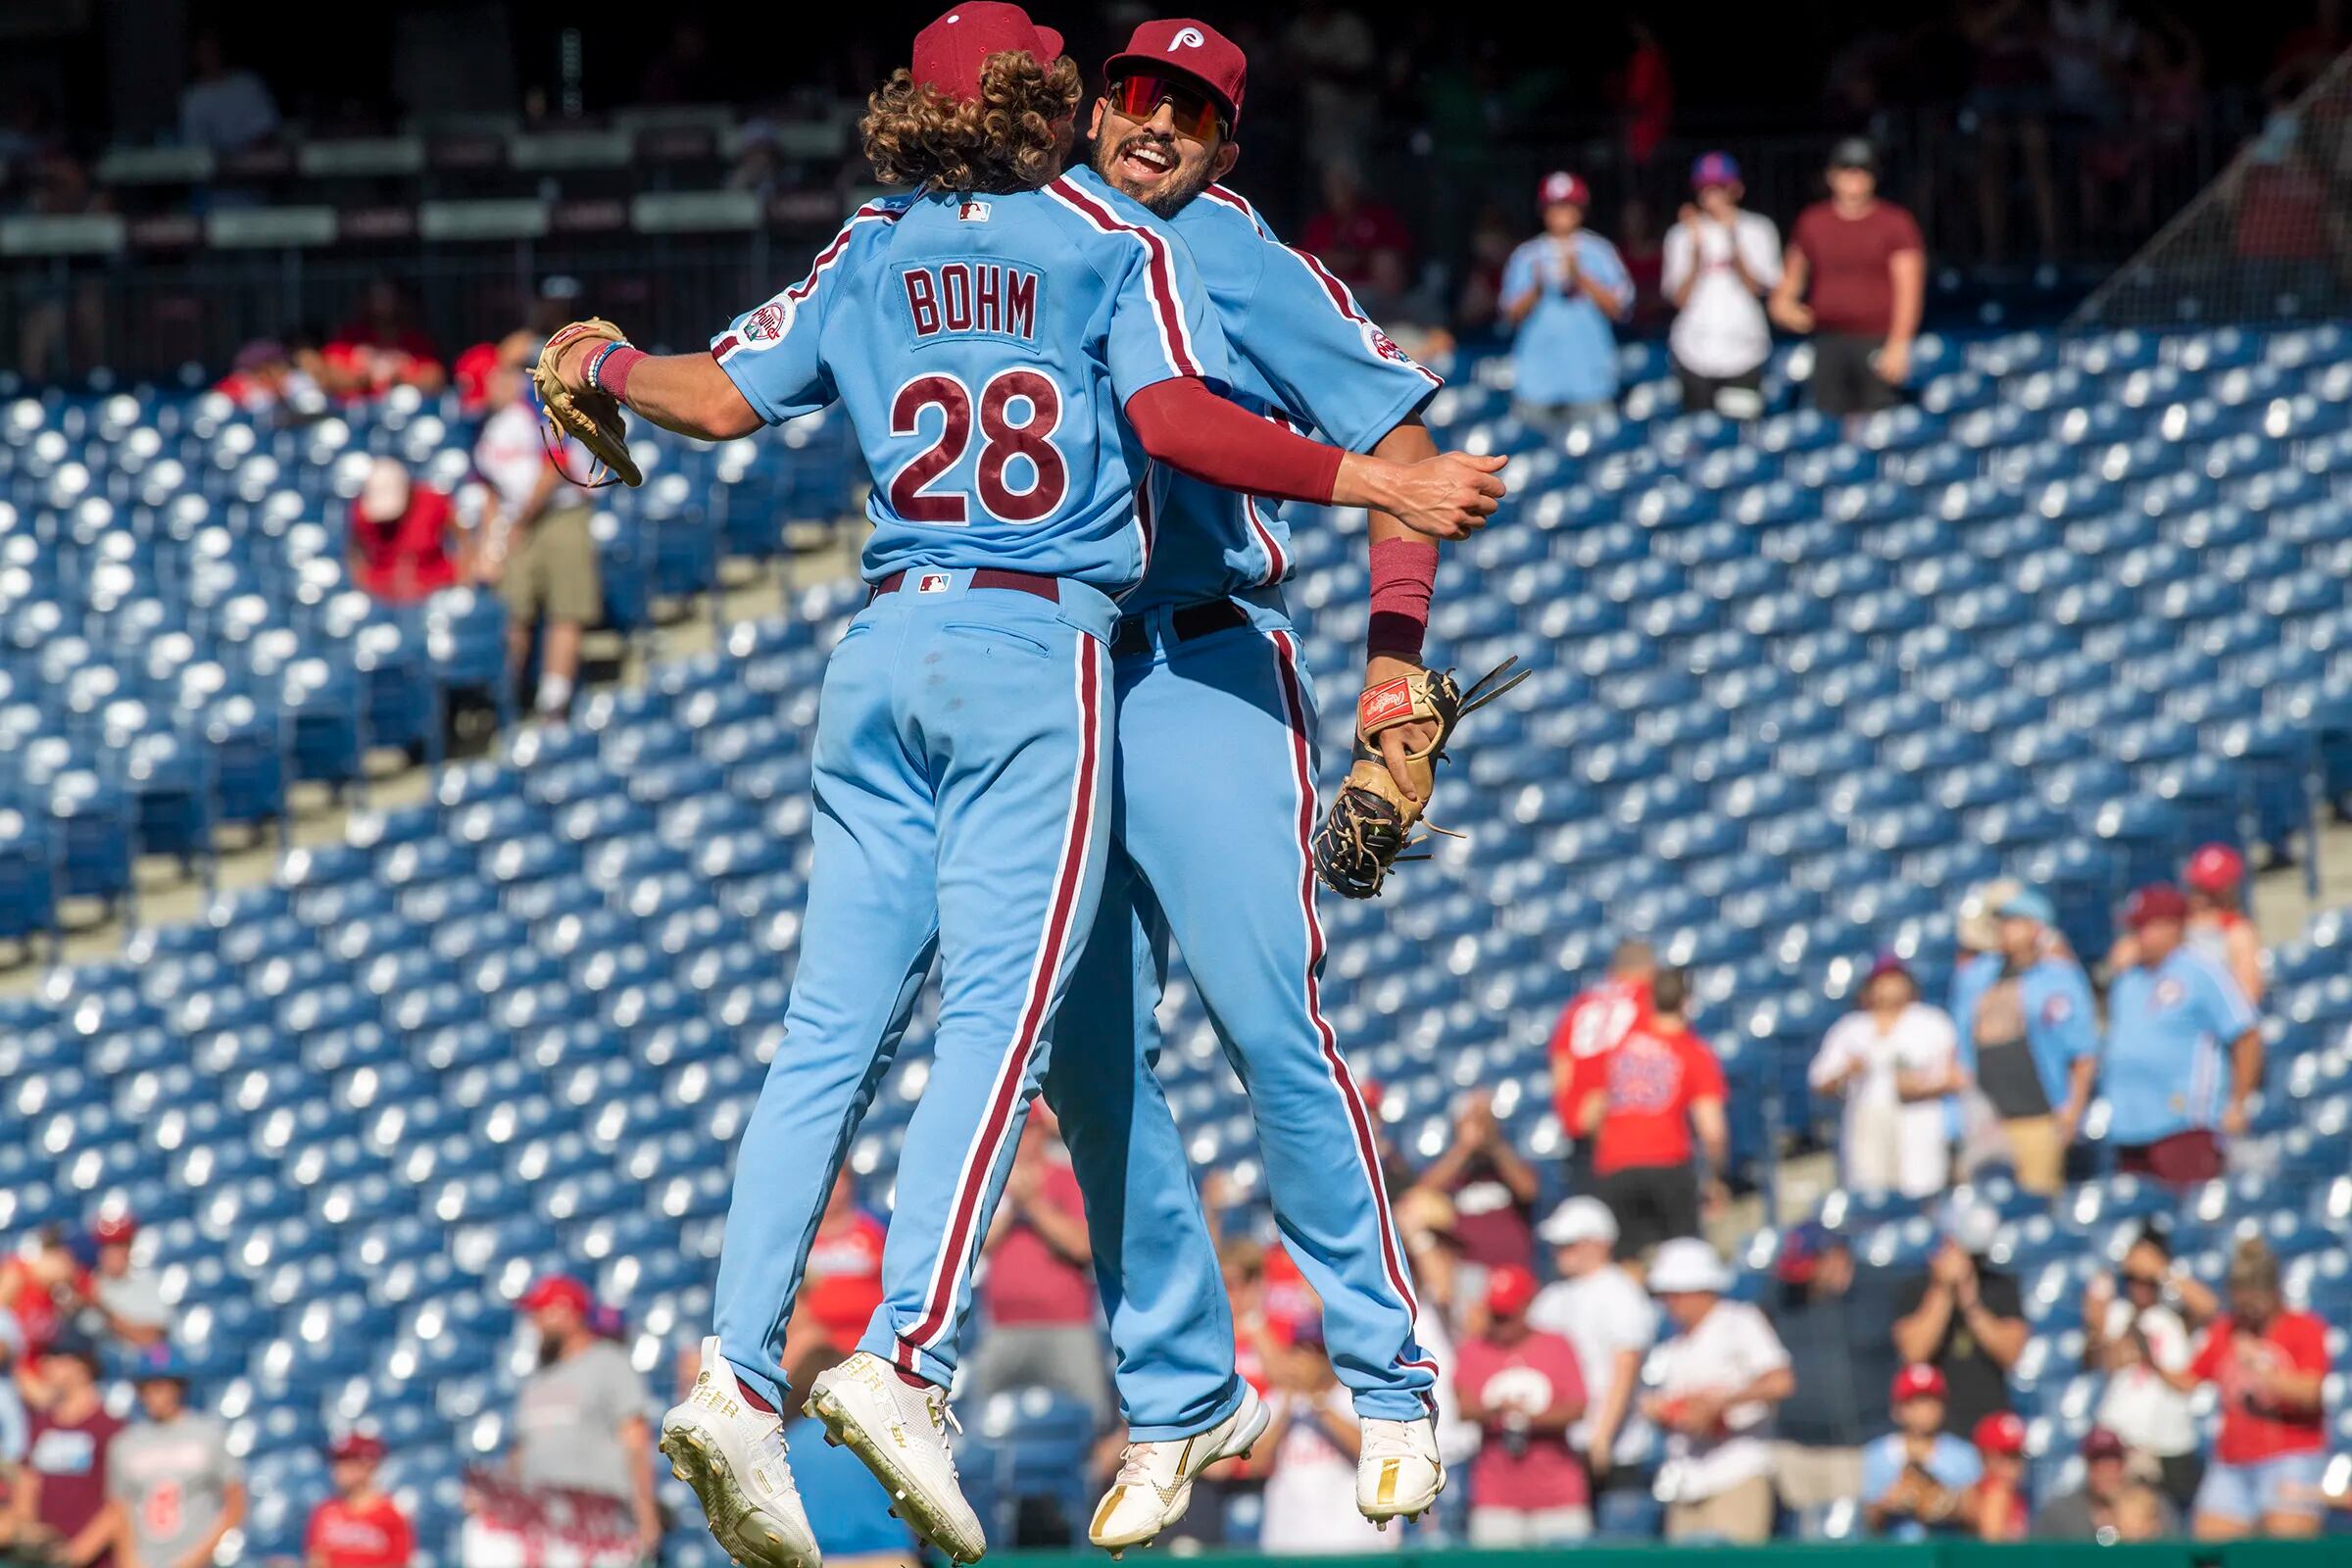 Phillies hit 4 homers in 13-1 win, finish sweep of Nationals